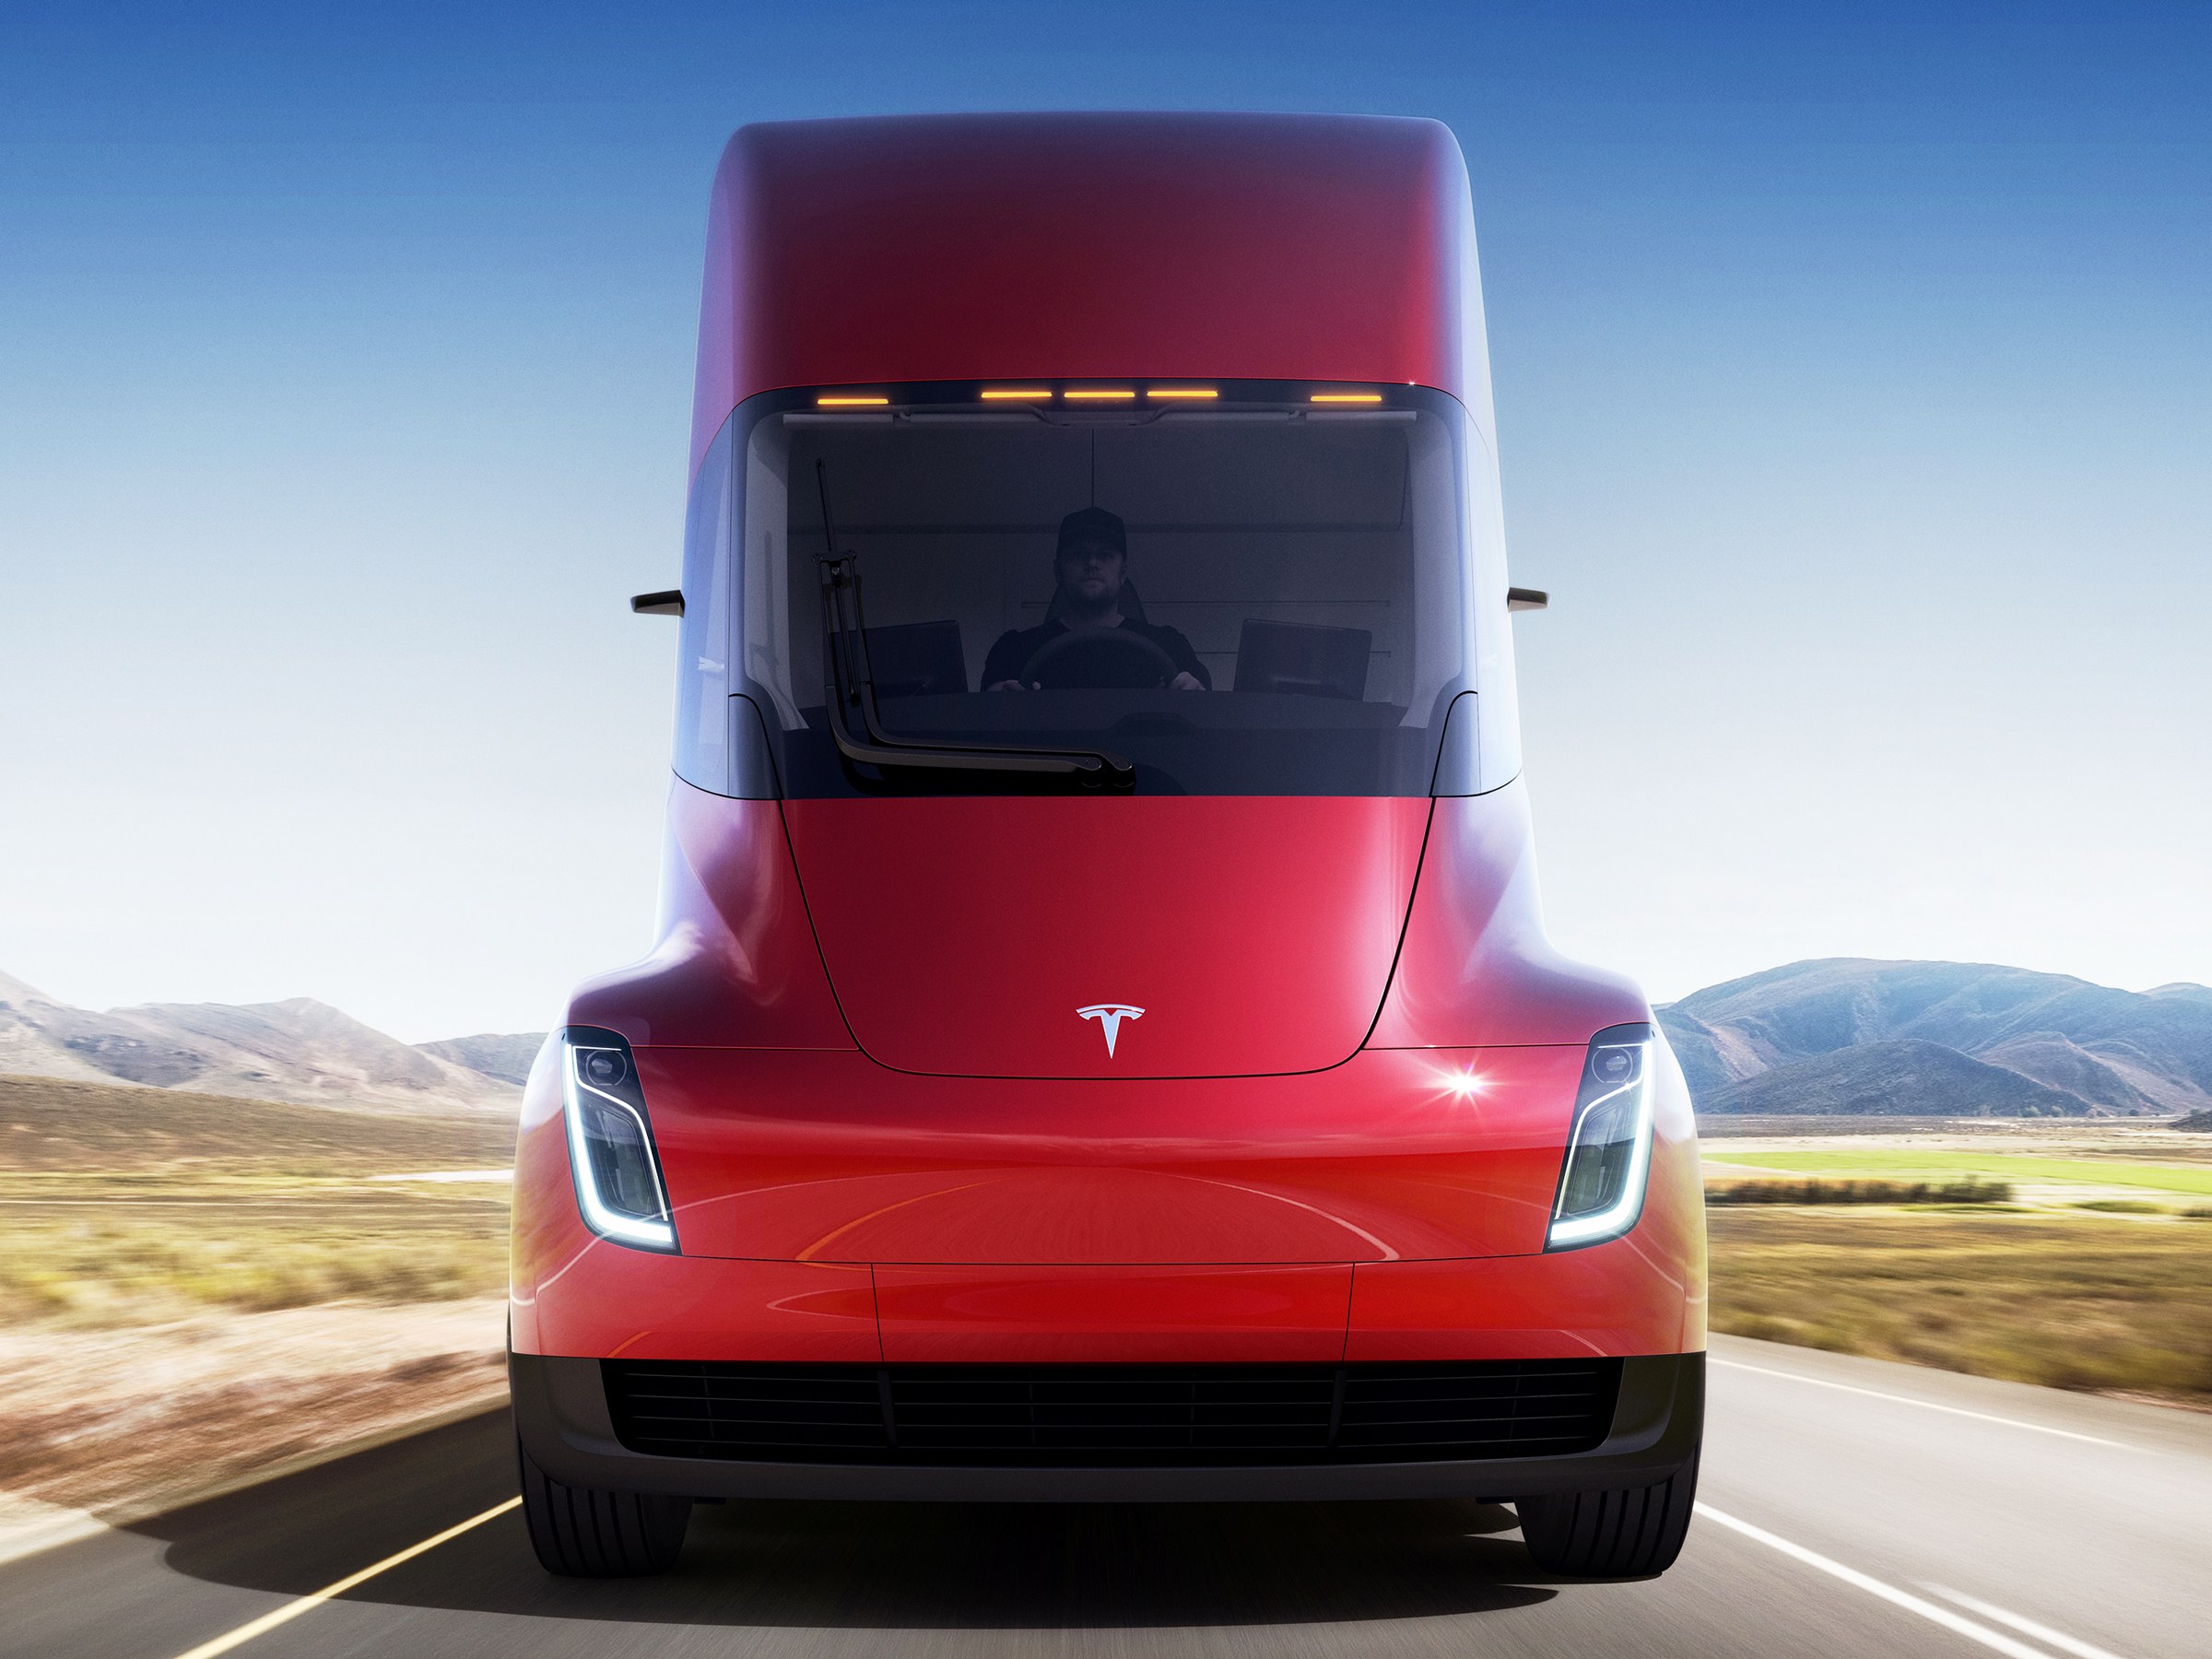 What Does Tesla's Automated Truck Mean for Truckers? | WIRED